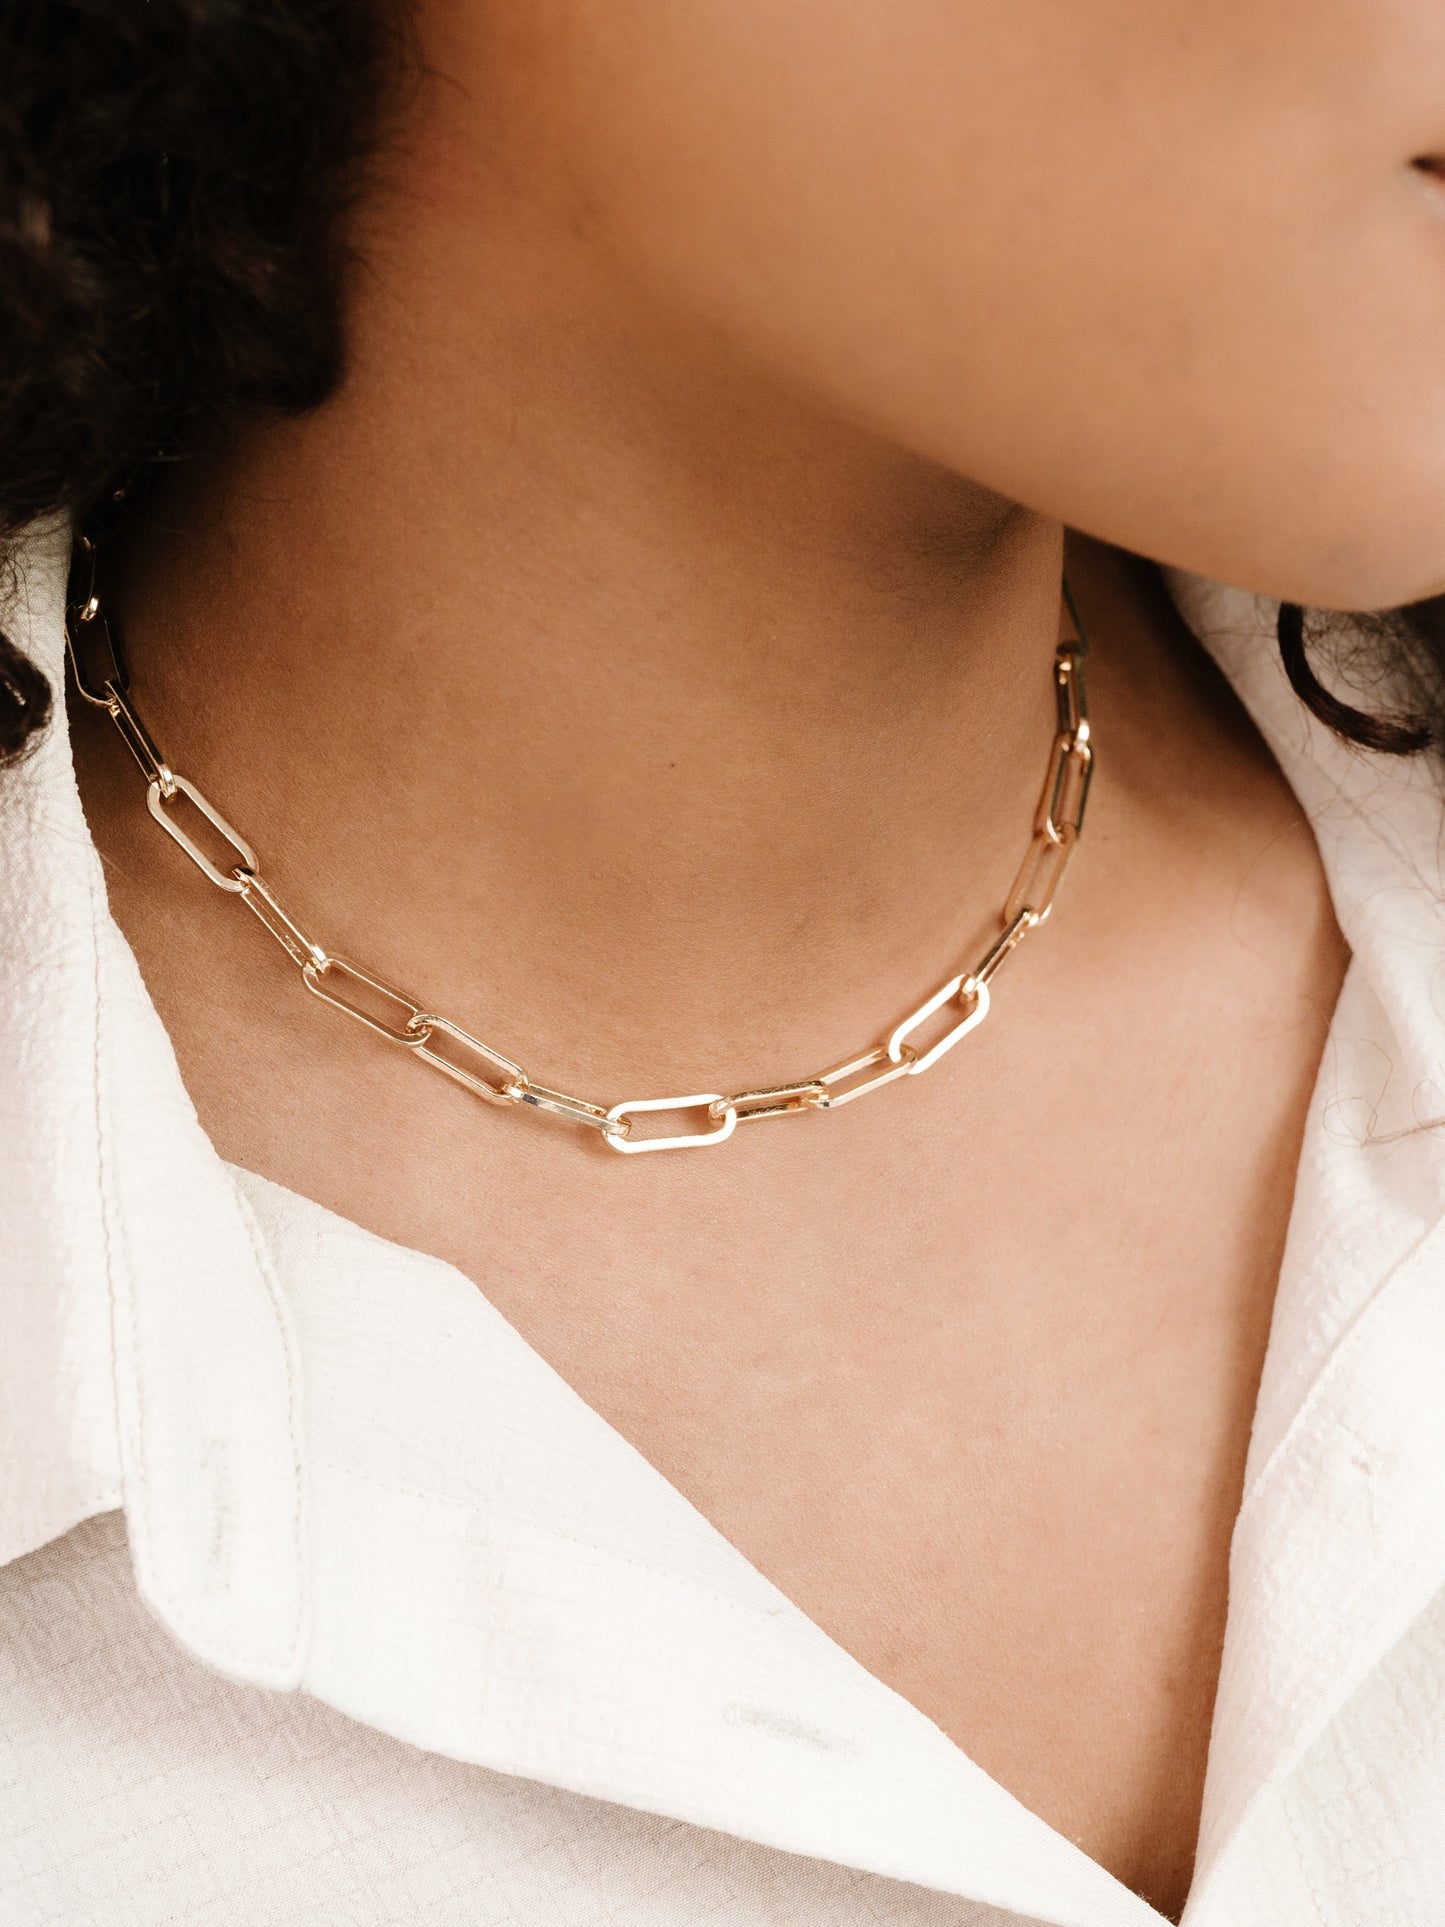 Interlinked Chain Necklace on model